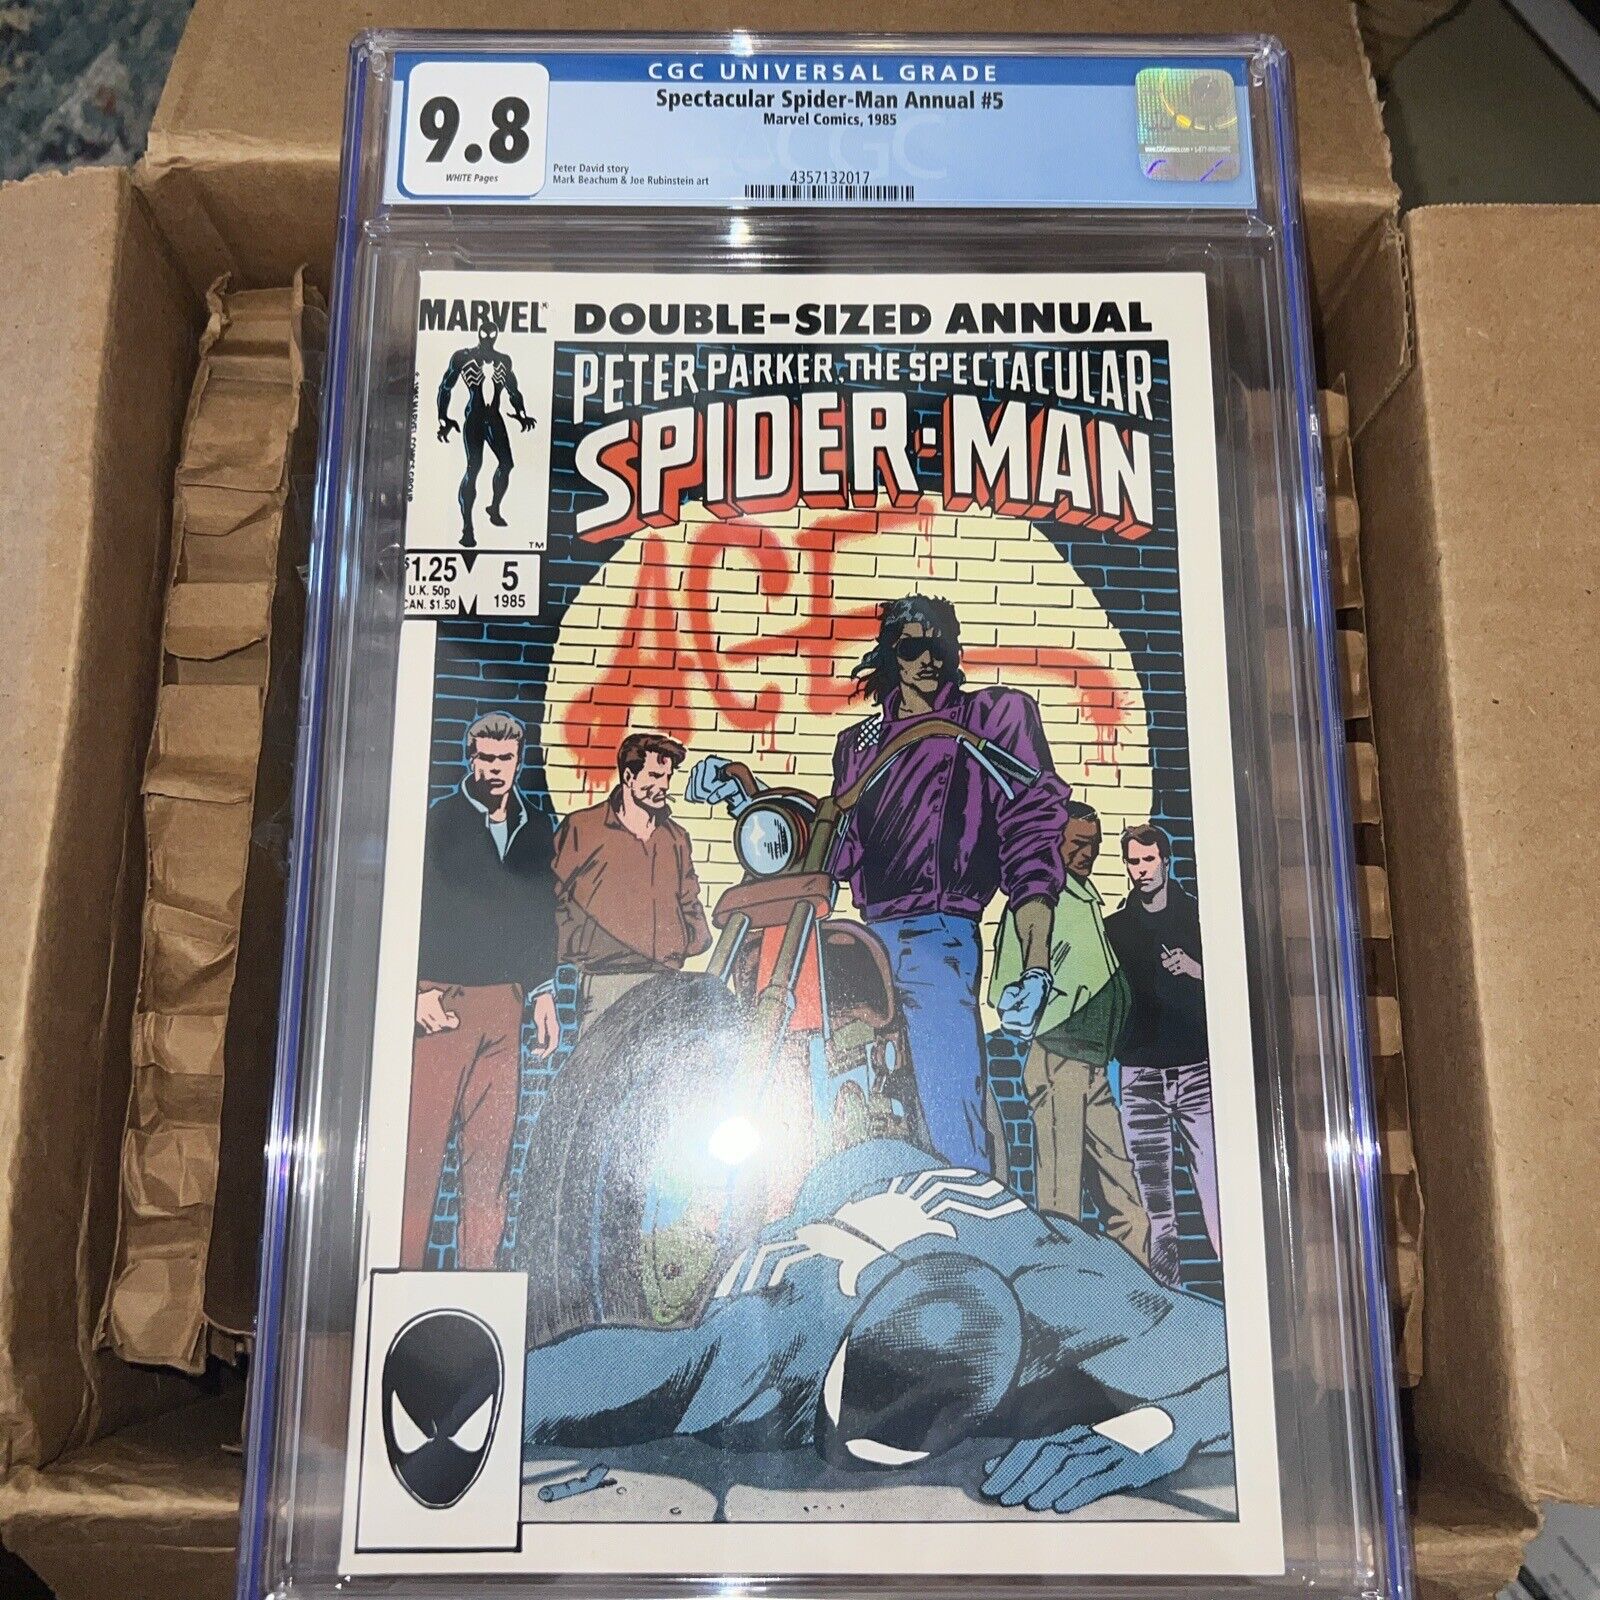 Peter Parker The Spectacular Spider-Man Annual #5 Marvel Comics ©1985 CGC 9.6